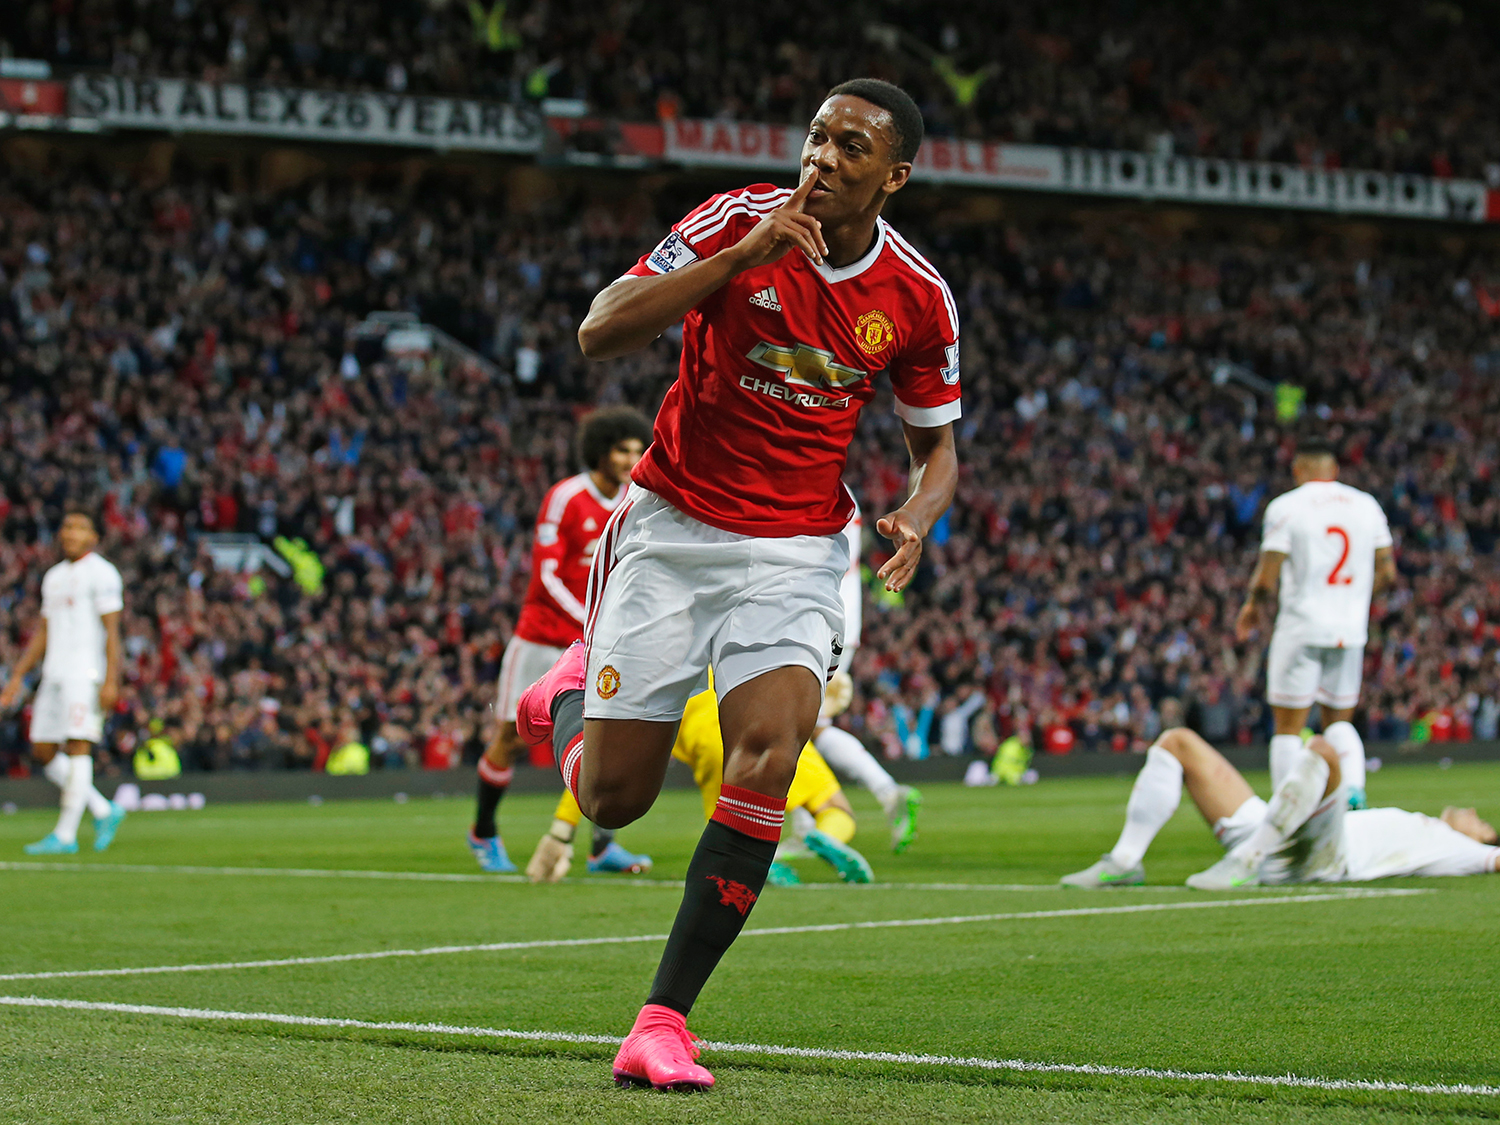 Anthony-Martial-manchester-united-new-player-for-2015-2016-season